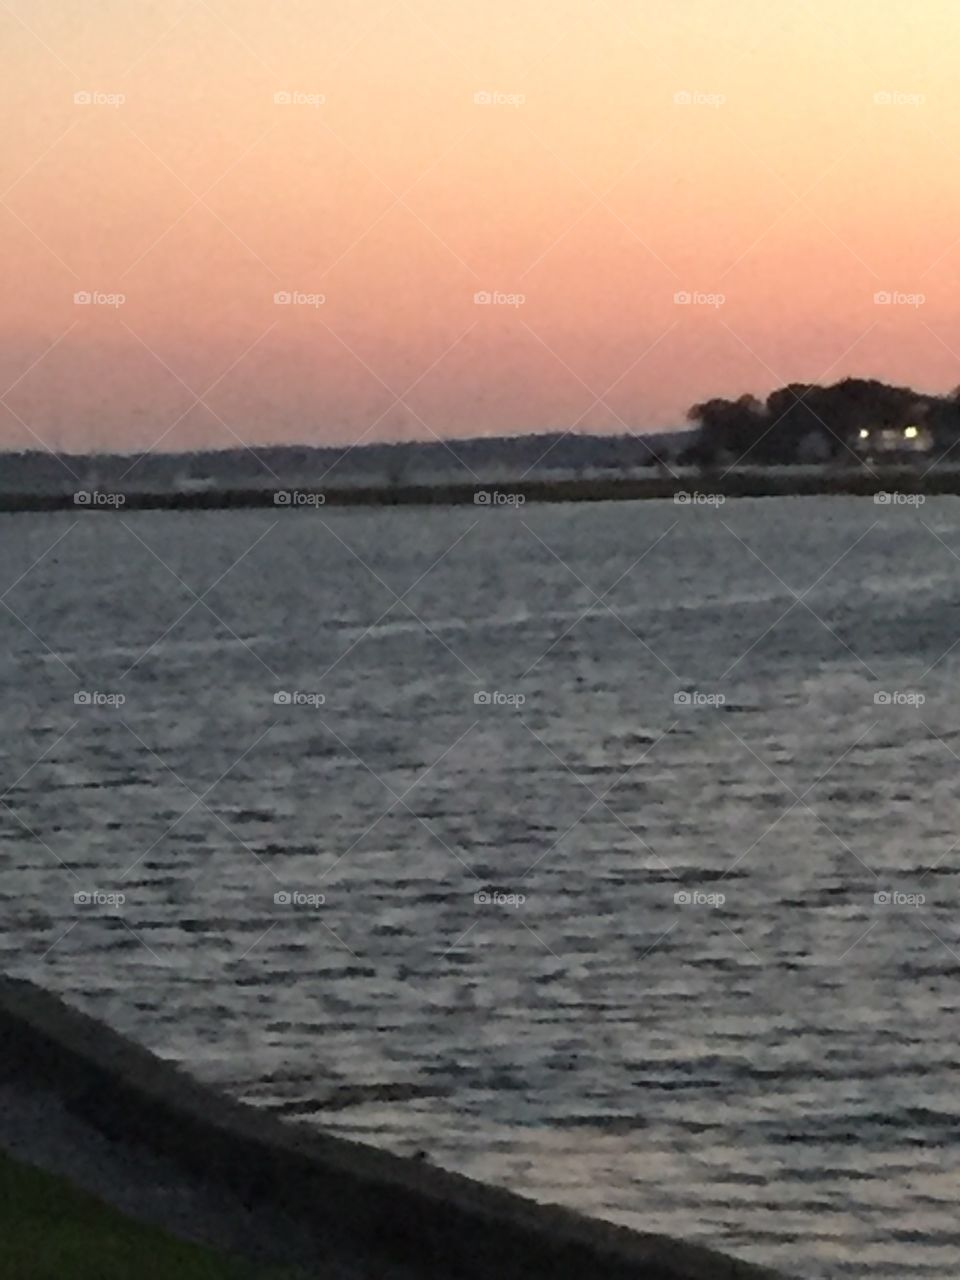 Sunset over the Mystic